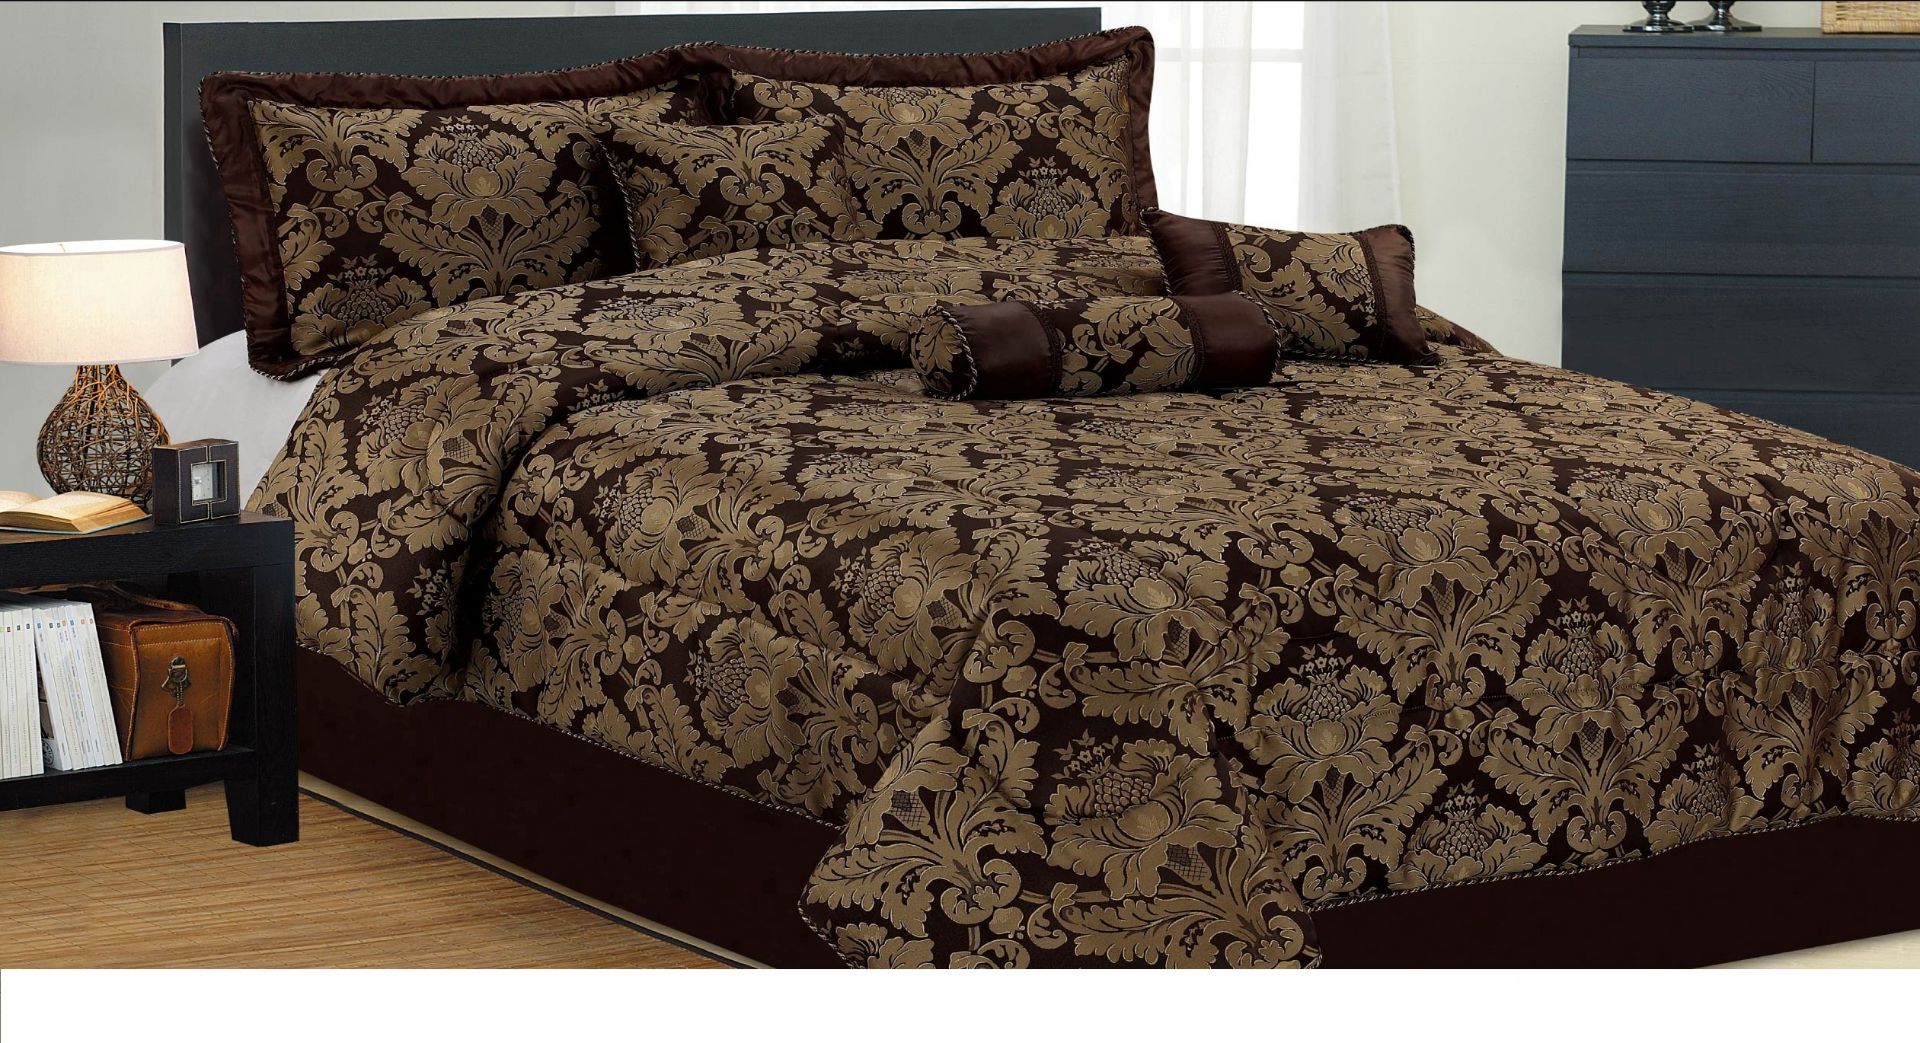 V Grade A Jacquard 7 pce King Size Bed Set RRP129.99 To Include Bed Spread Valance Sheet Pillow